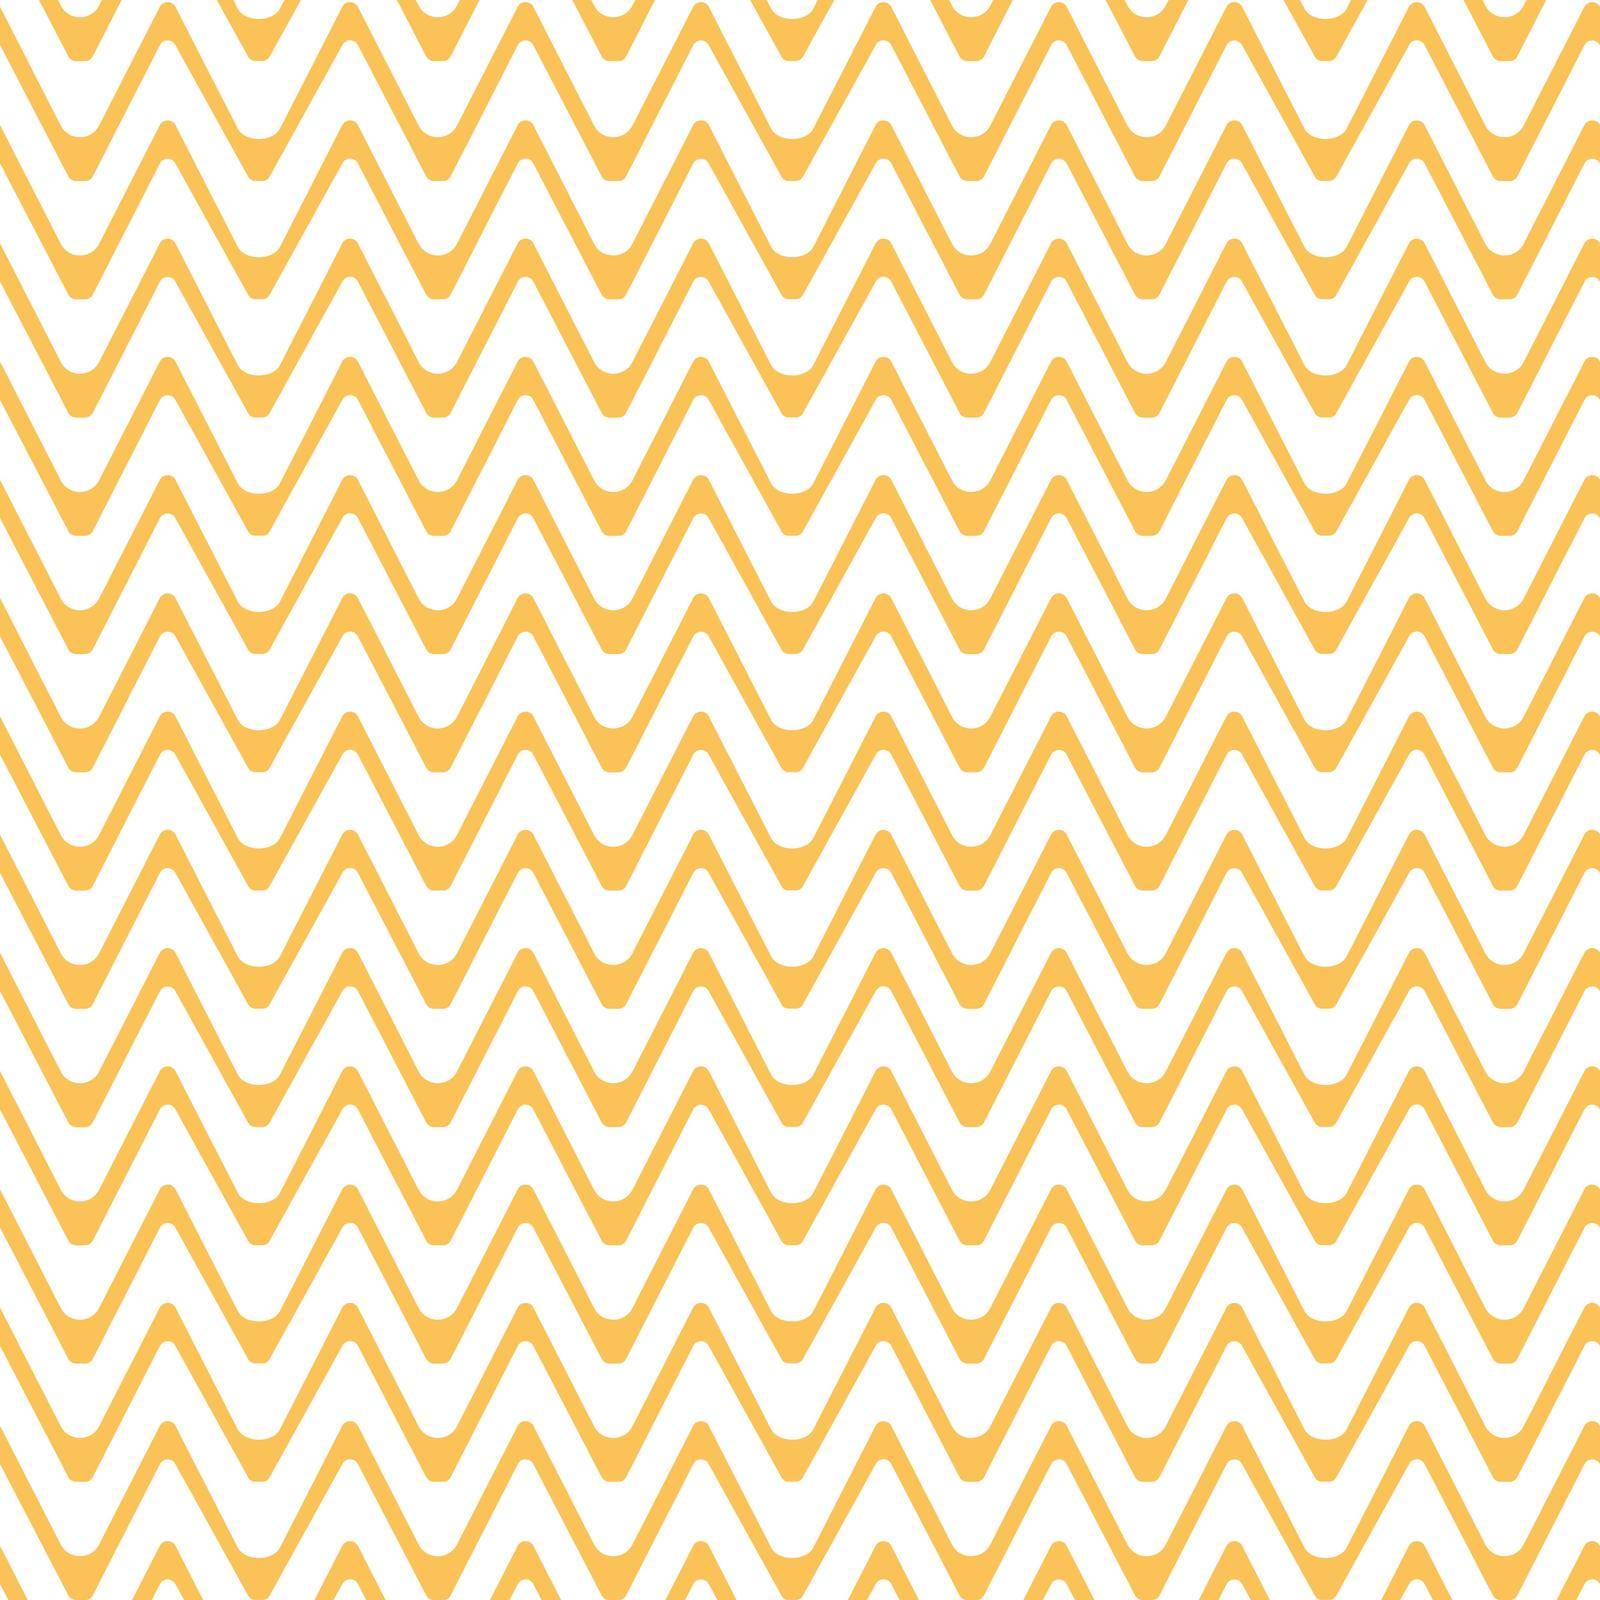 Design business Empty template isolated Minimalist graphic layout template for advertising . Horizontal Zigzag Wavy Parallel Line in Seamless Repeat Pattern Vector